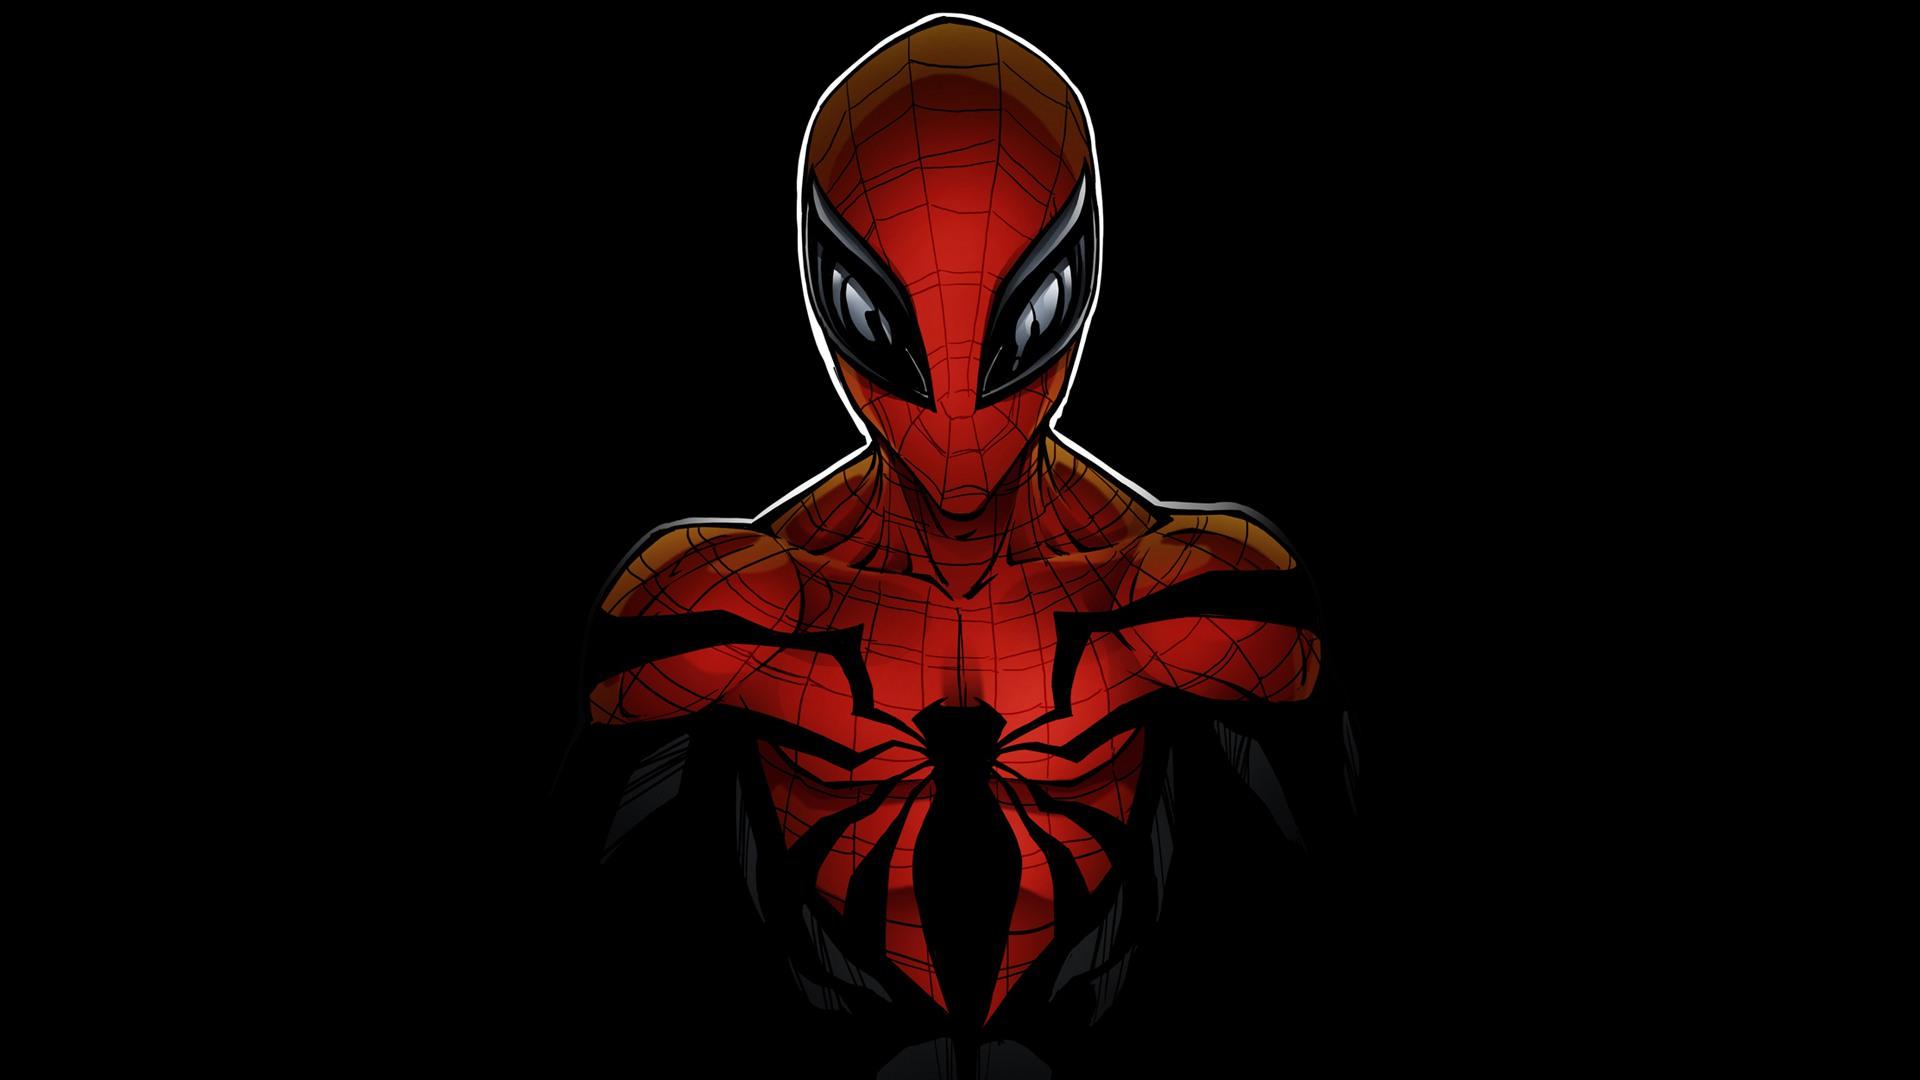 Spider Man Marvel Laptop Wallpapers Top Free Spider Man Marvel Laptop Backgrounds Wallpaperaccess